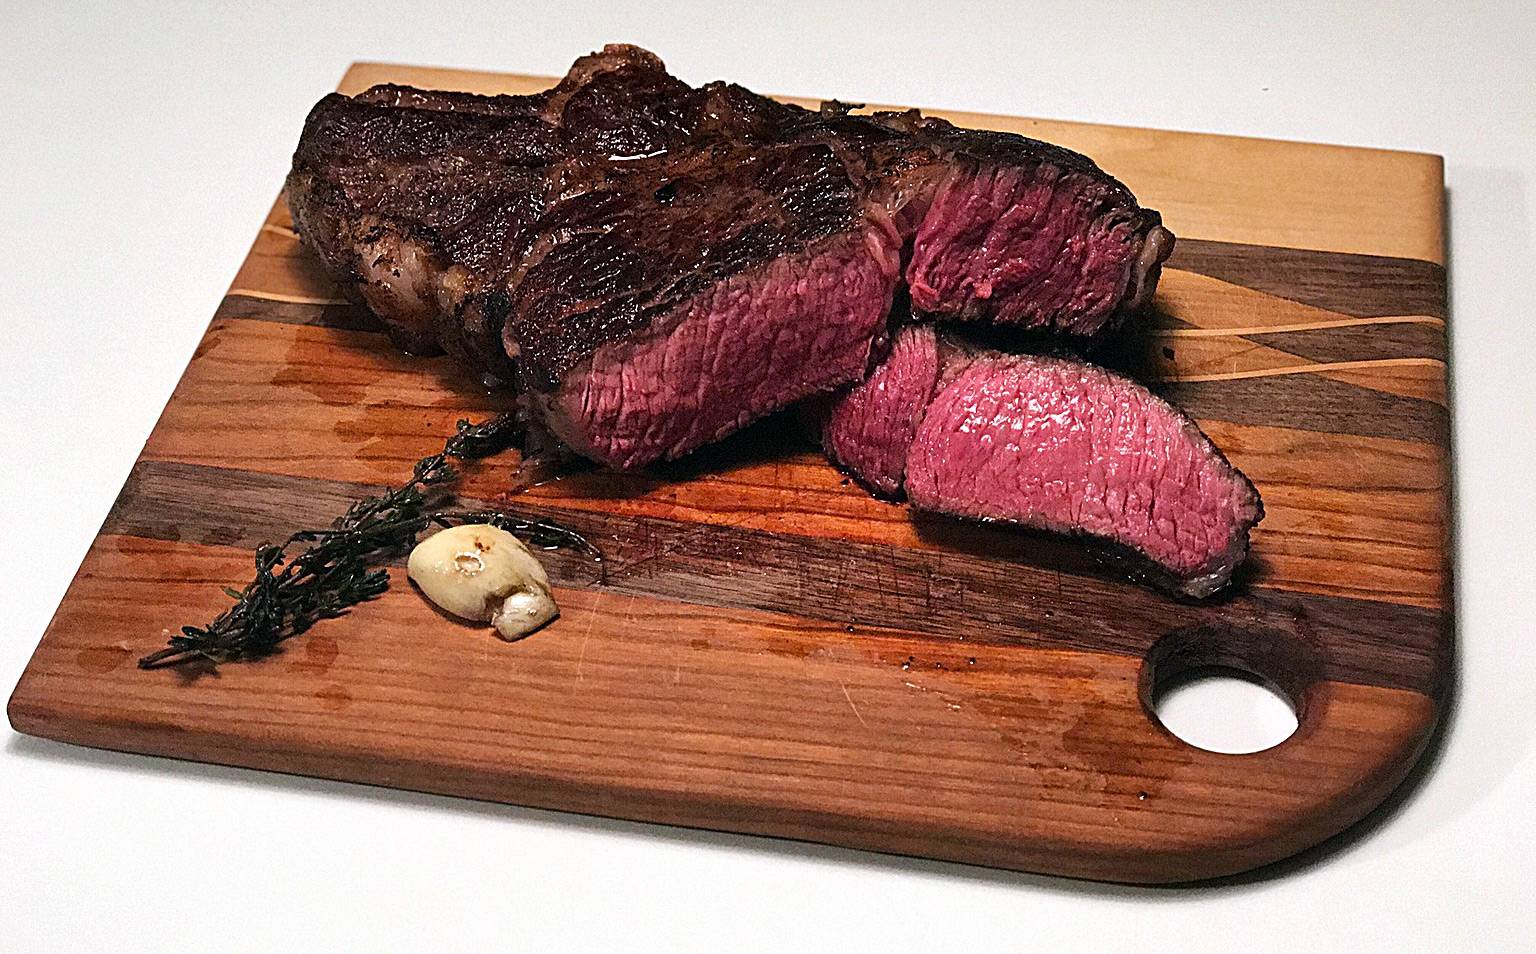 How to Get Crust on Steak